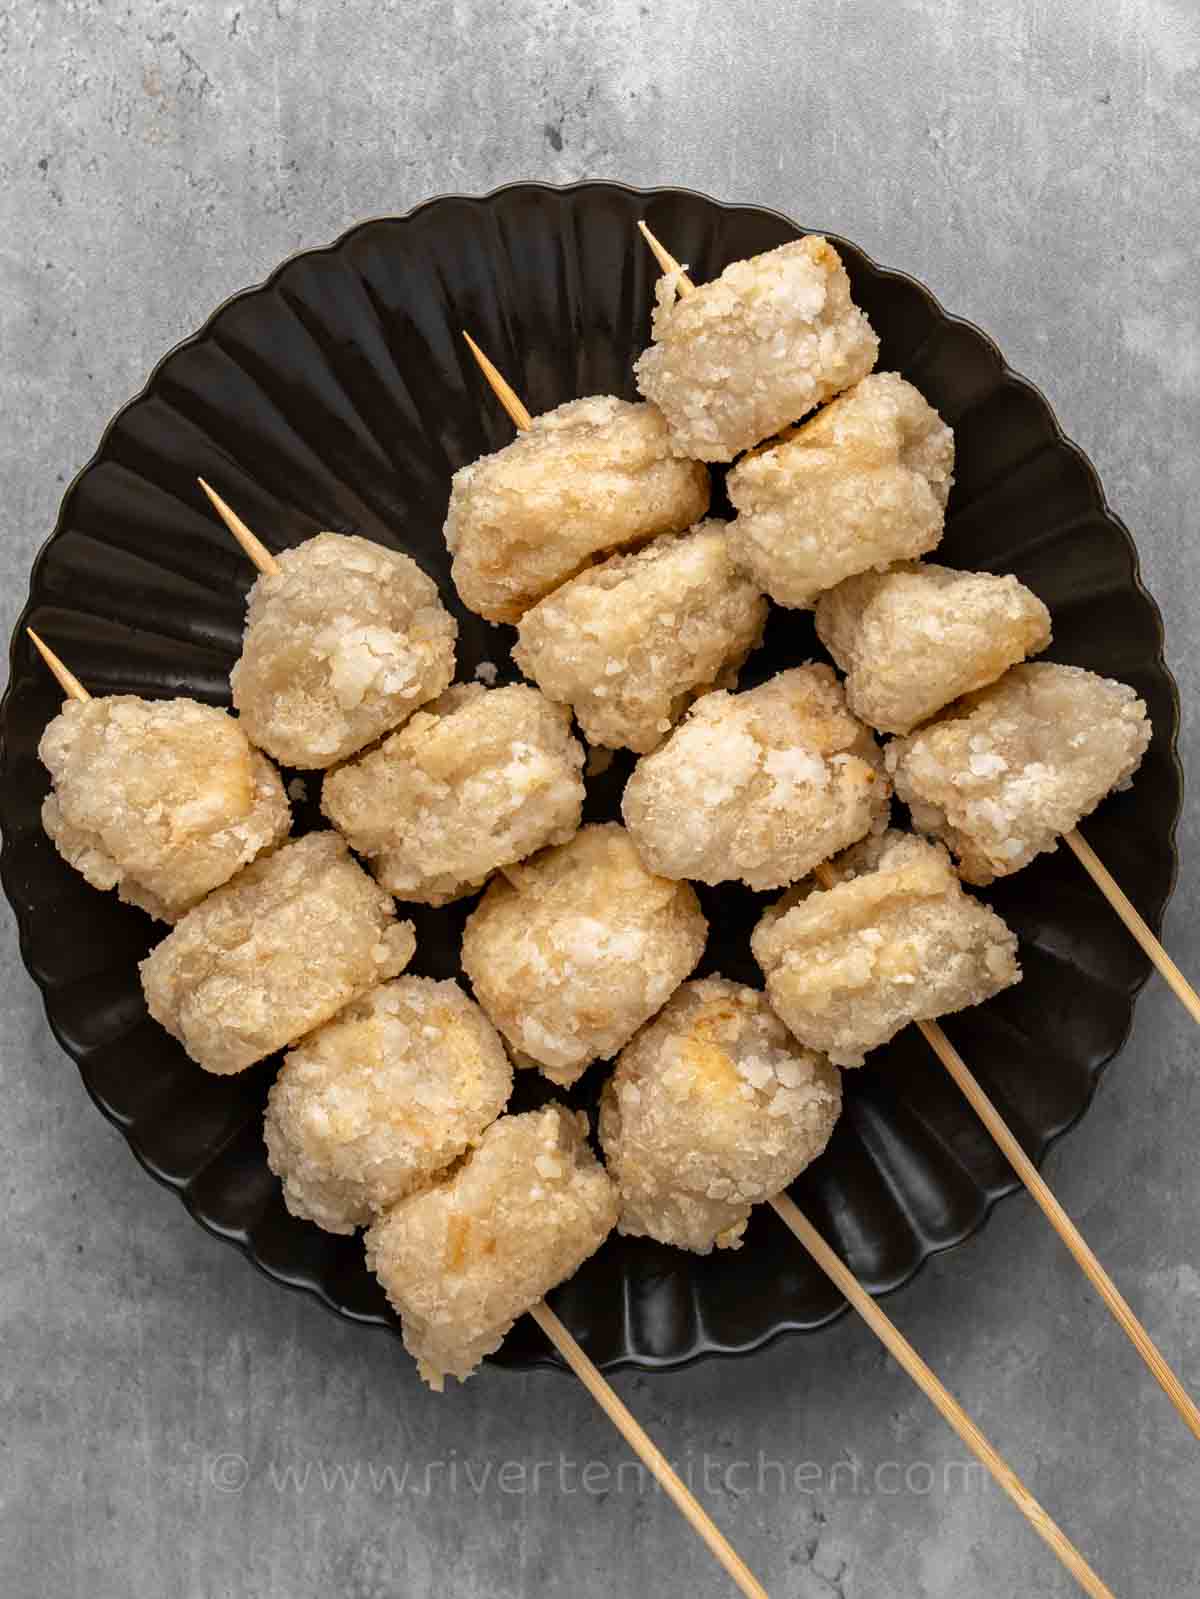 fried mochi donuts with coconut and sugar